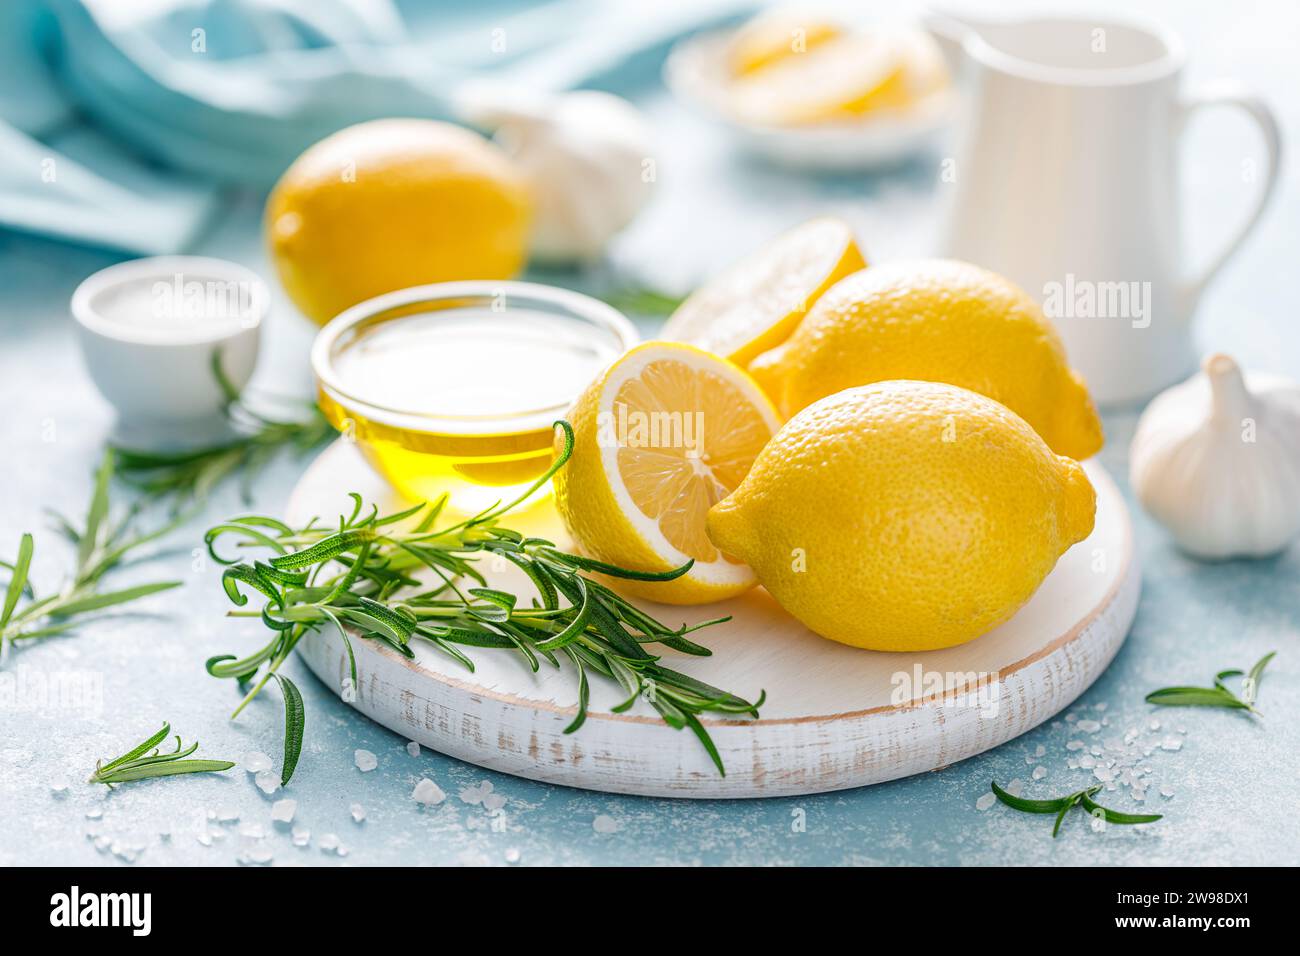 Lemon, rosemary, garlic and olive oil. Ingredients for mediterranean cuisine cooking Stock Photo